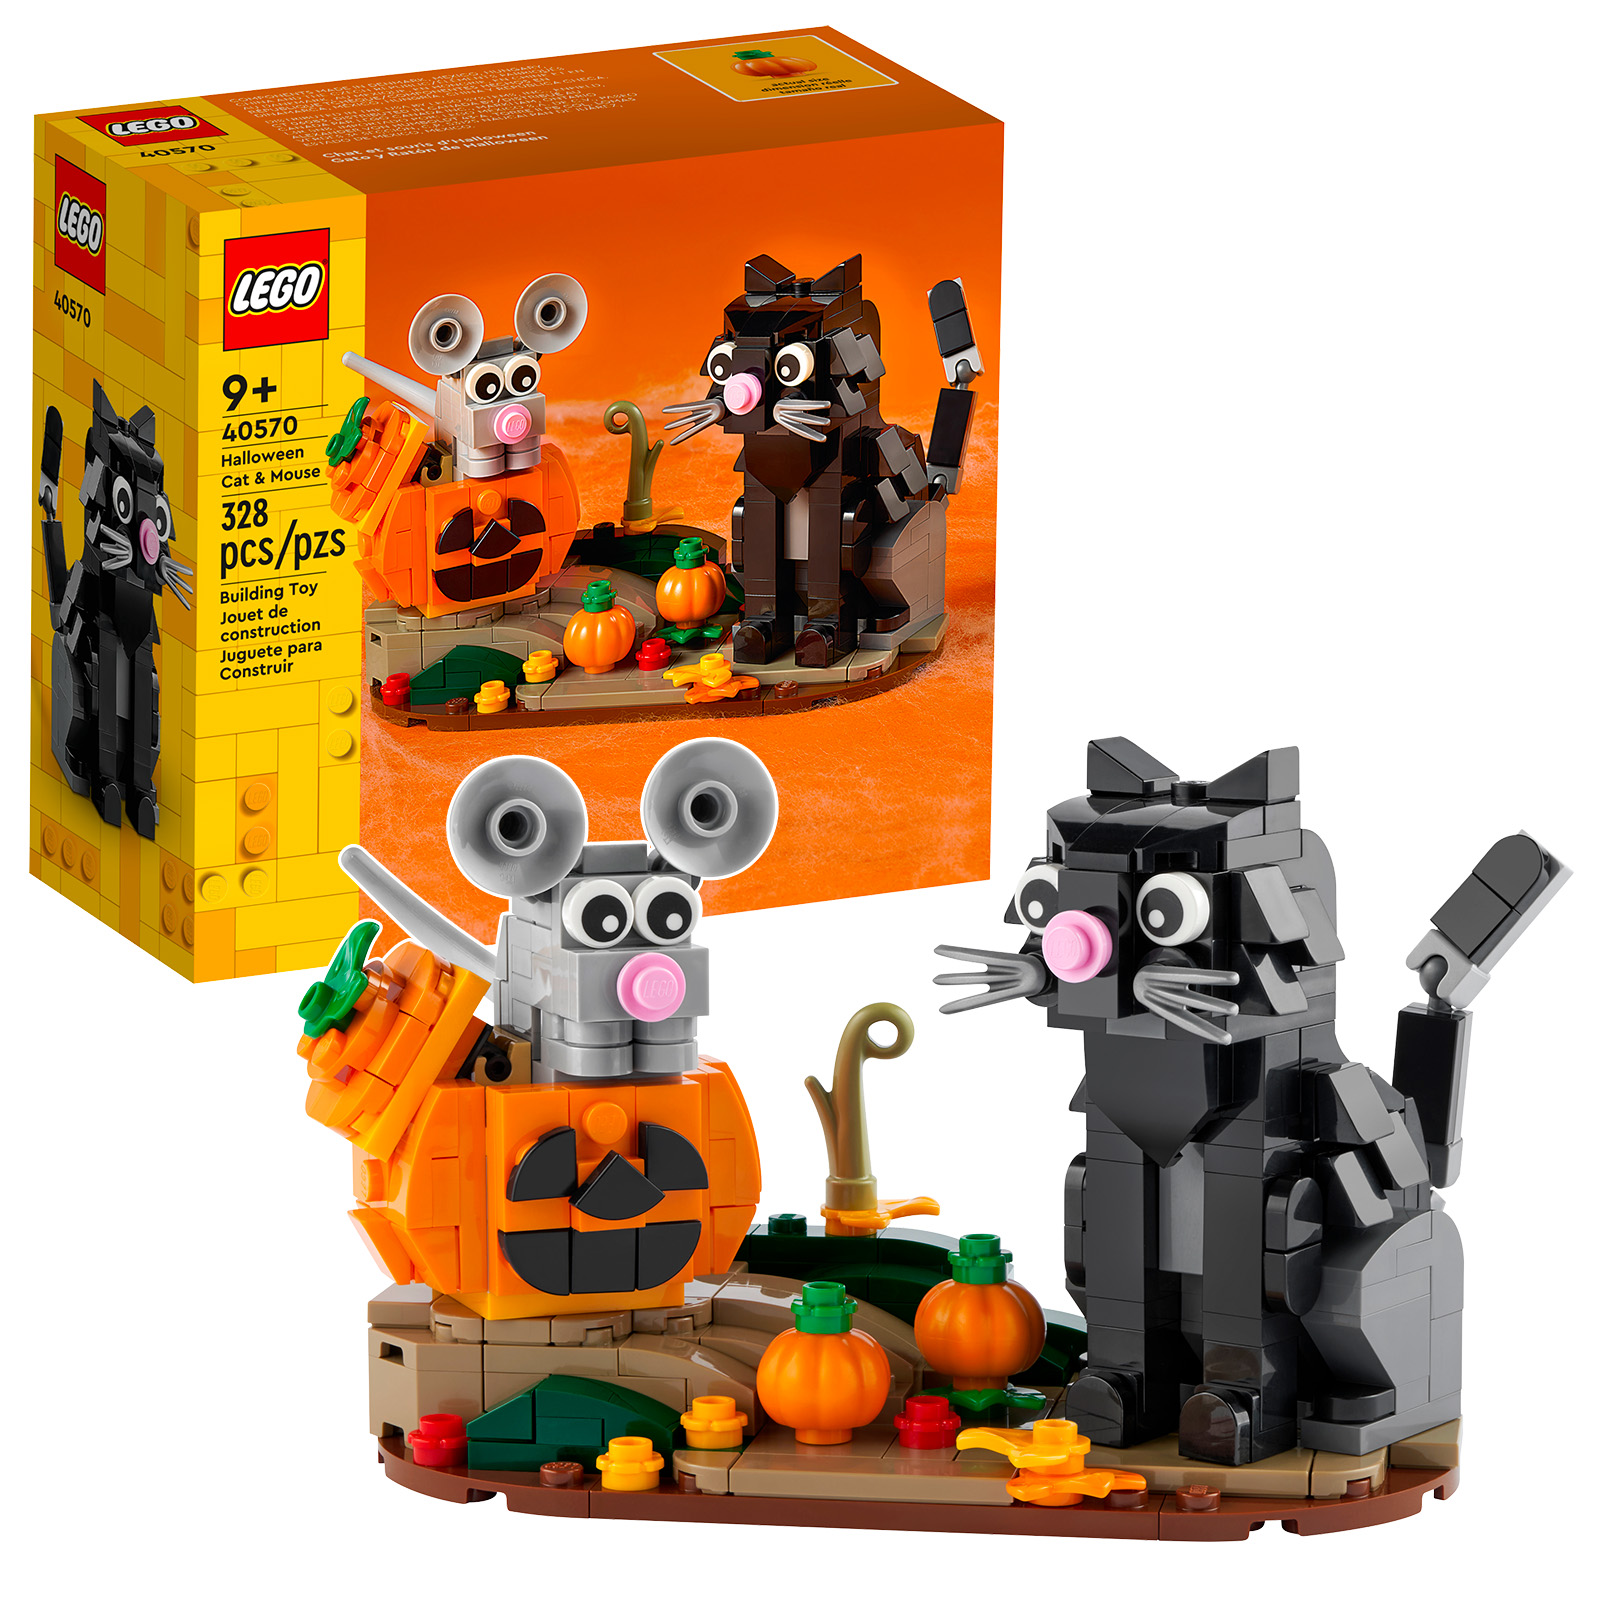 It's almost Halloween: the 40570 Halloween Cat & Mouse set is online on the Shop